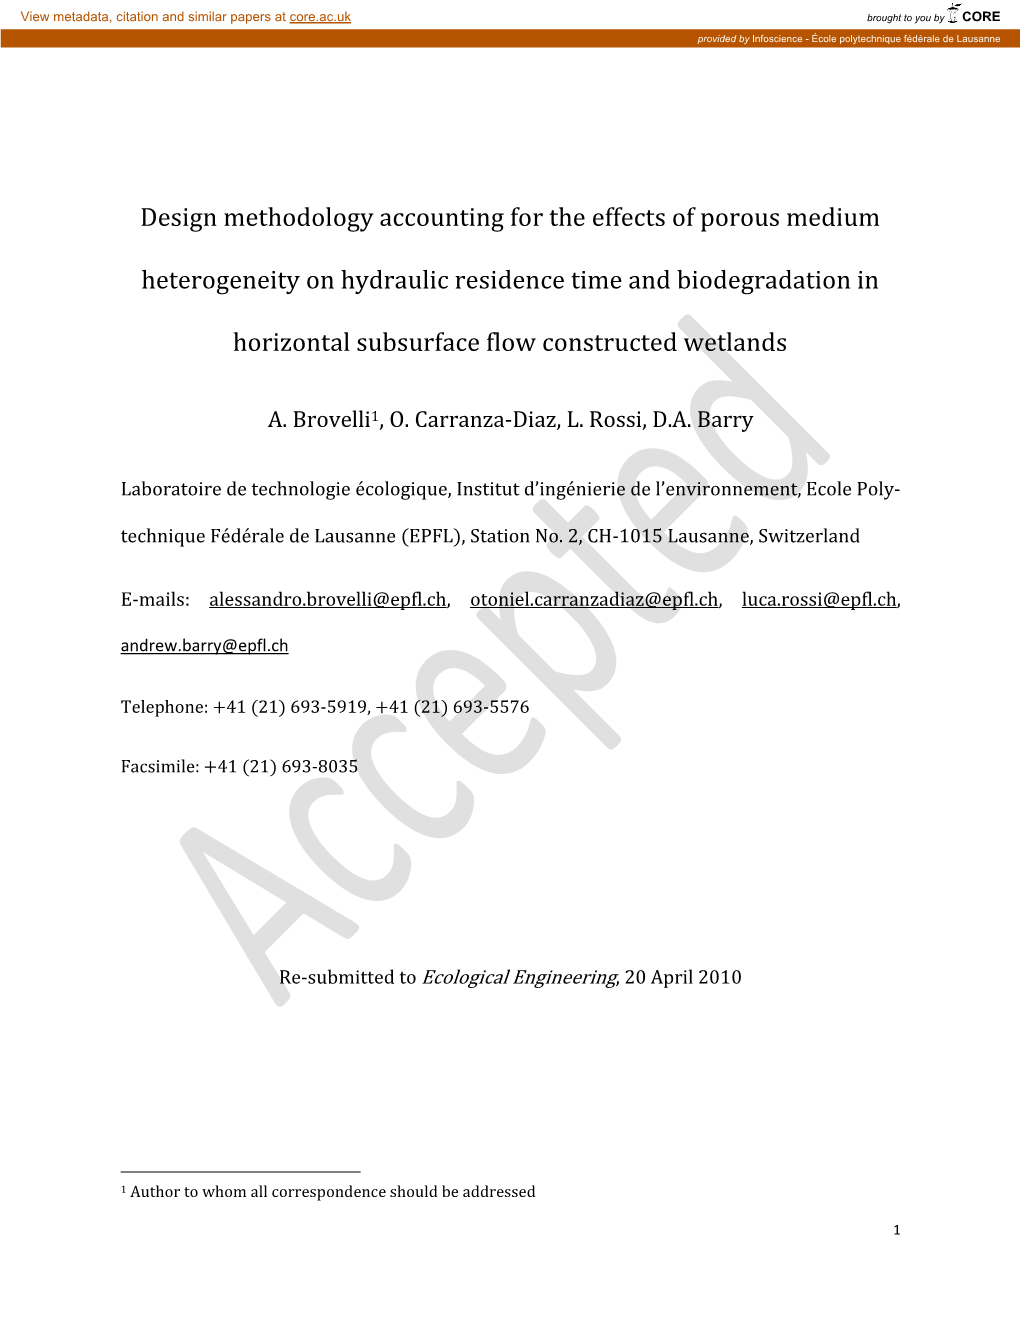 Design Methodology Accounting for the Effects of Porous Medium